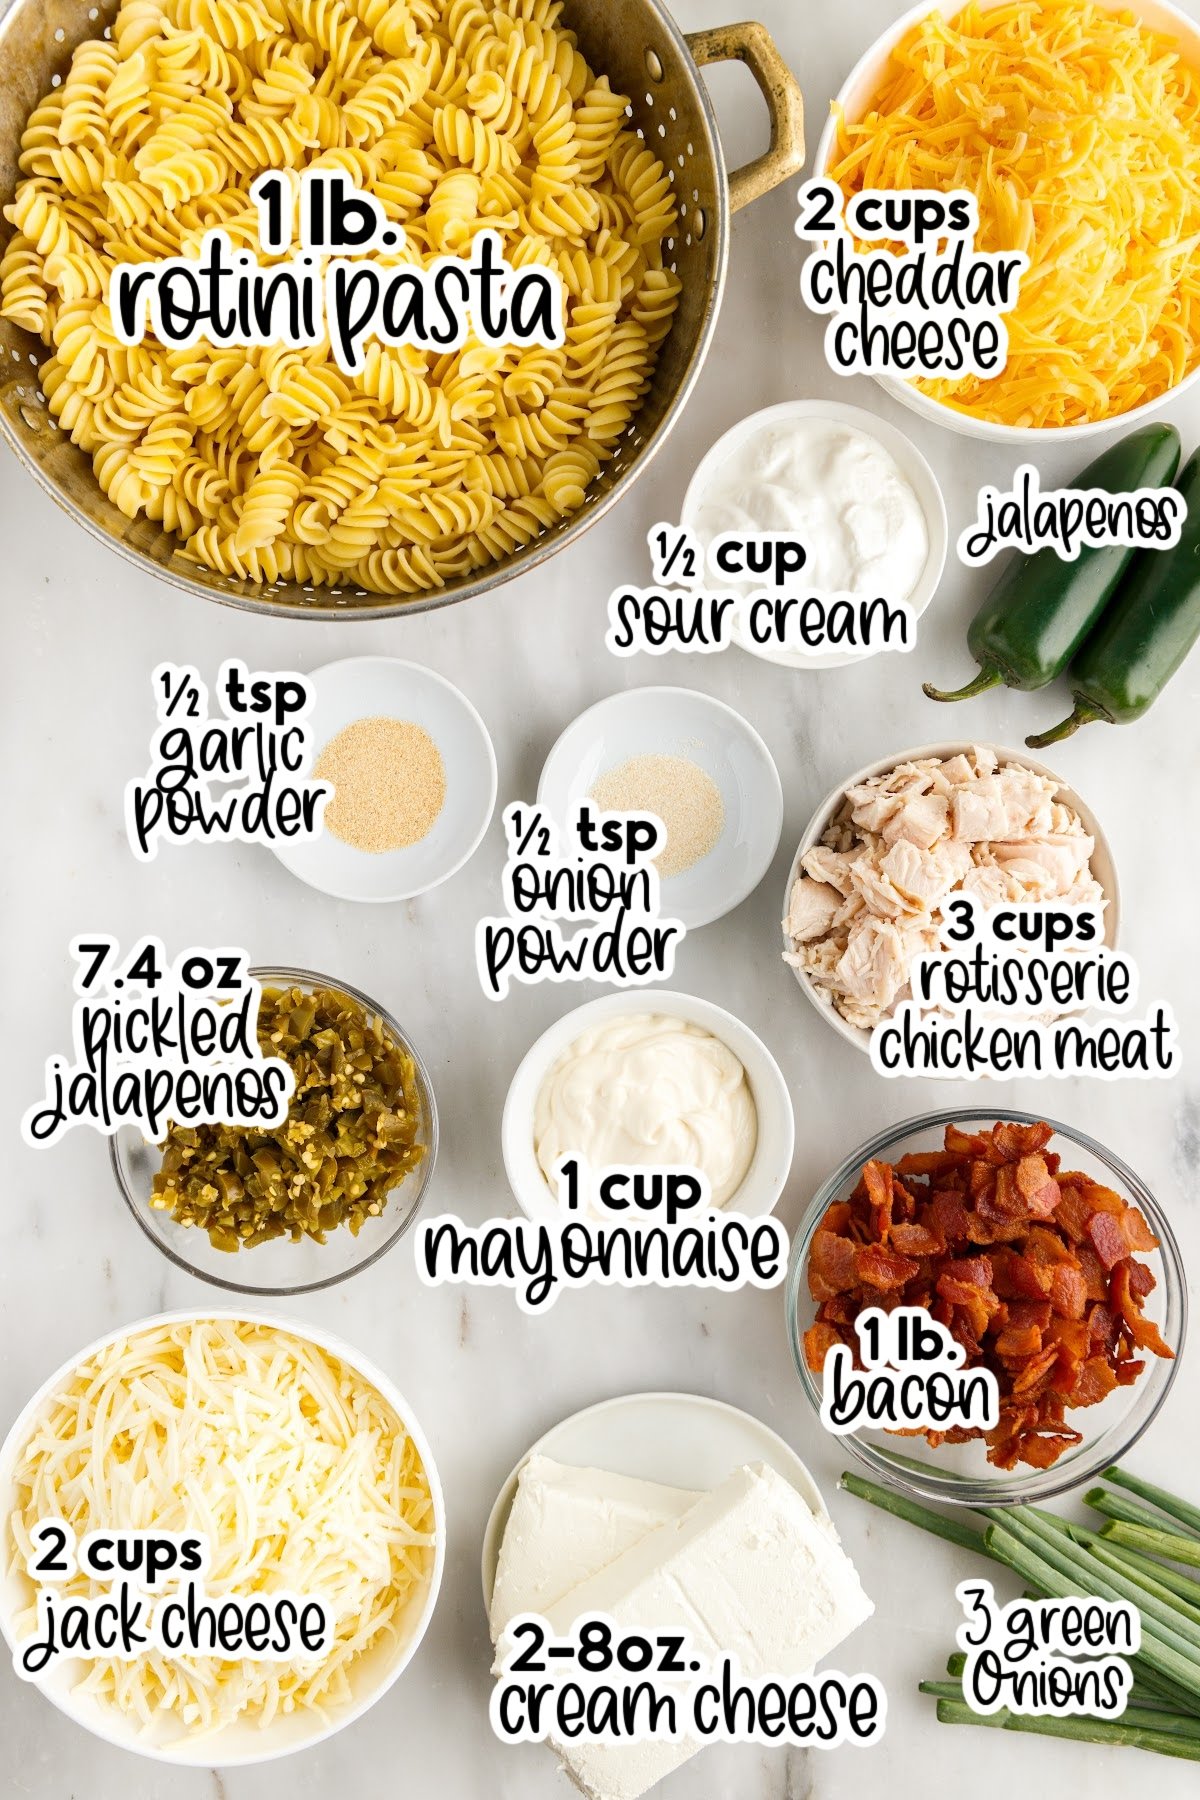 Ingredients needed to make Jalapeño Popper Chicken Casserole set out with text labels.